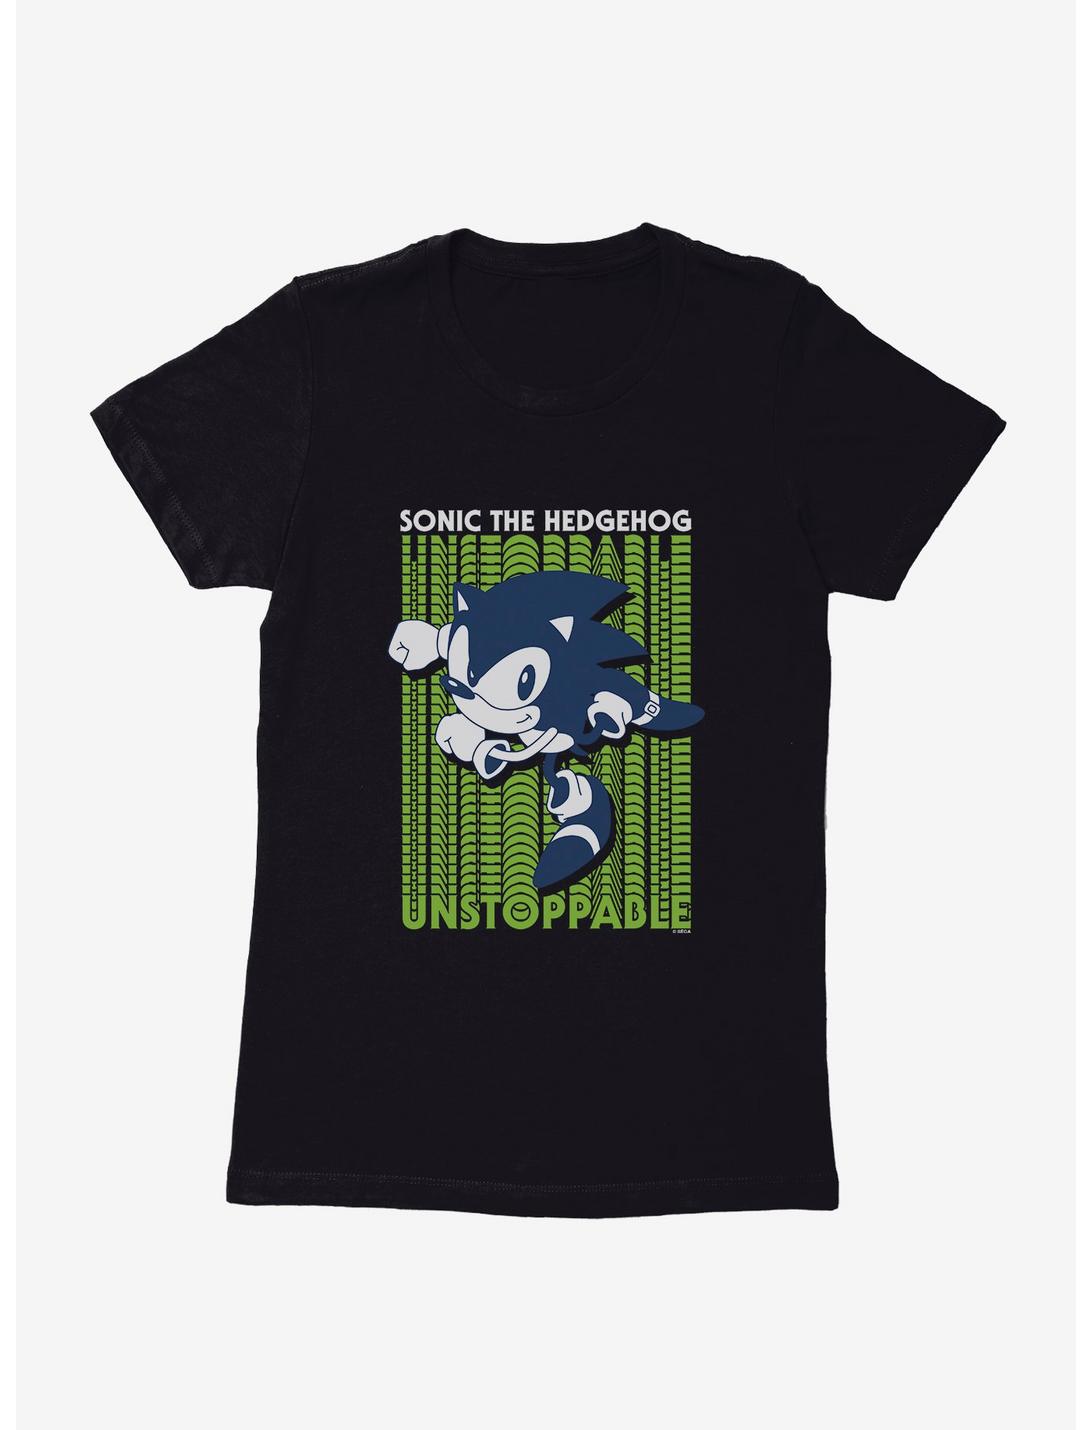 Sonic The Hedgehog Unstoppable Sonic Graphic Womens T-Shirt, BLACK, hi-res